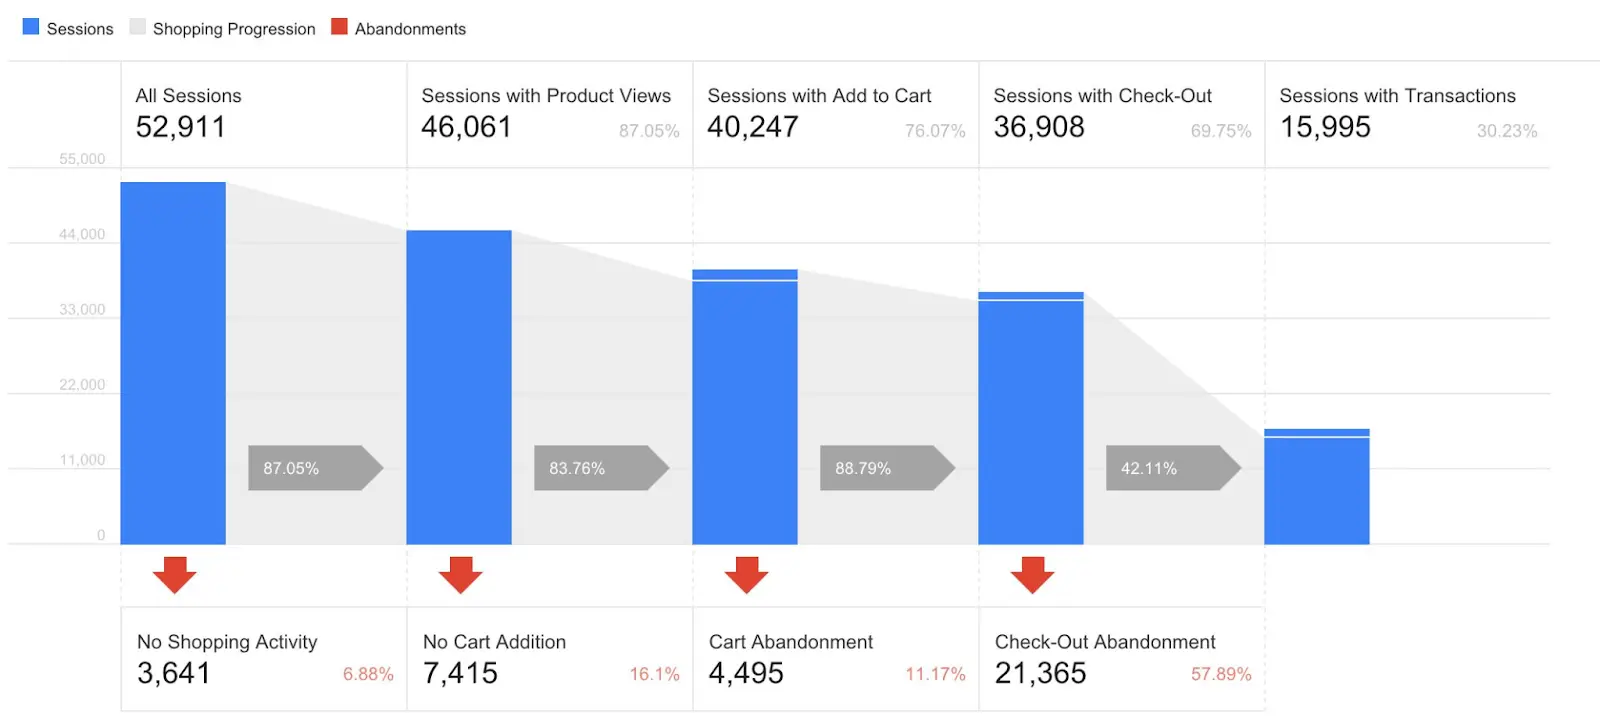 How to add Google Analytics to Shopify